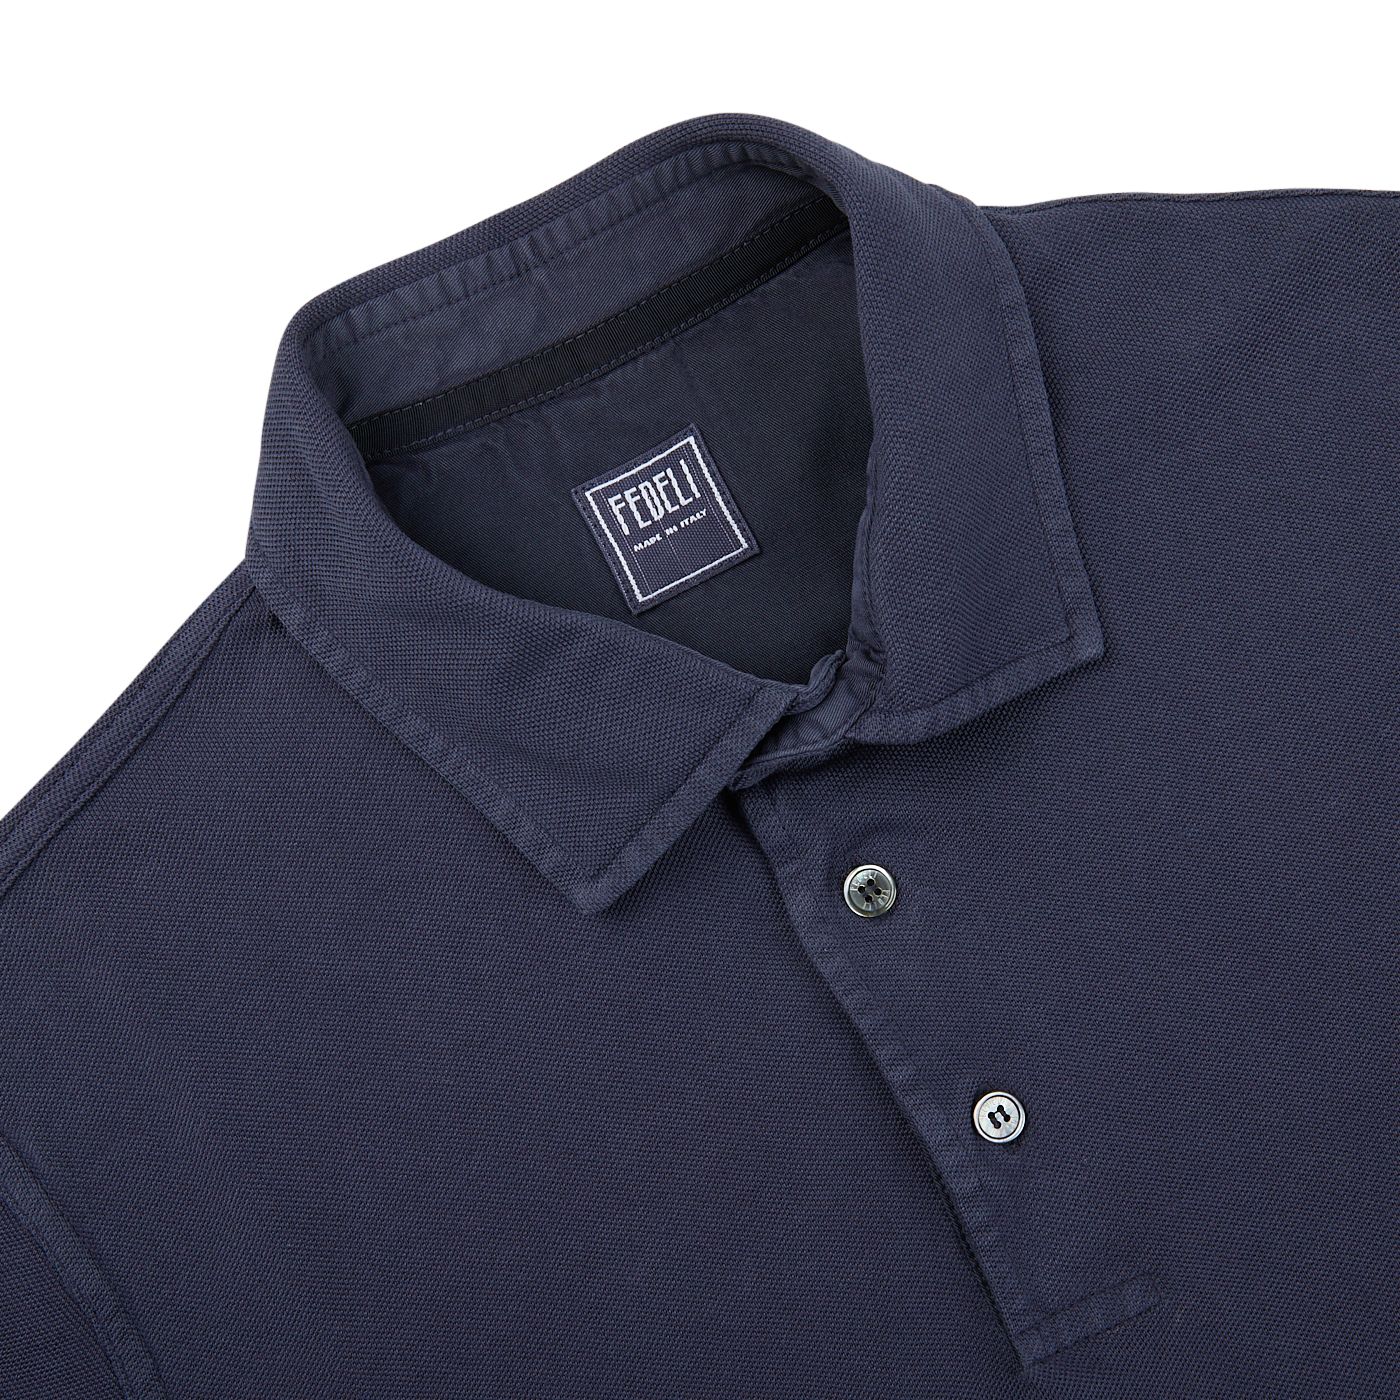 The Washed Navy Cotton Pique Polo Shirt by Fedeli.